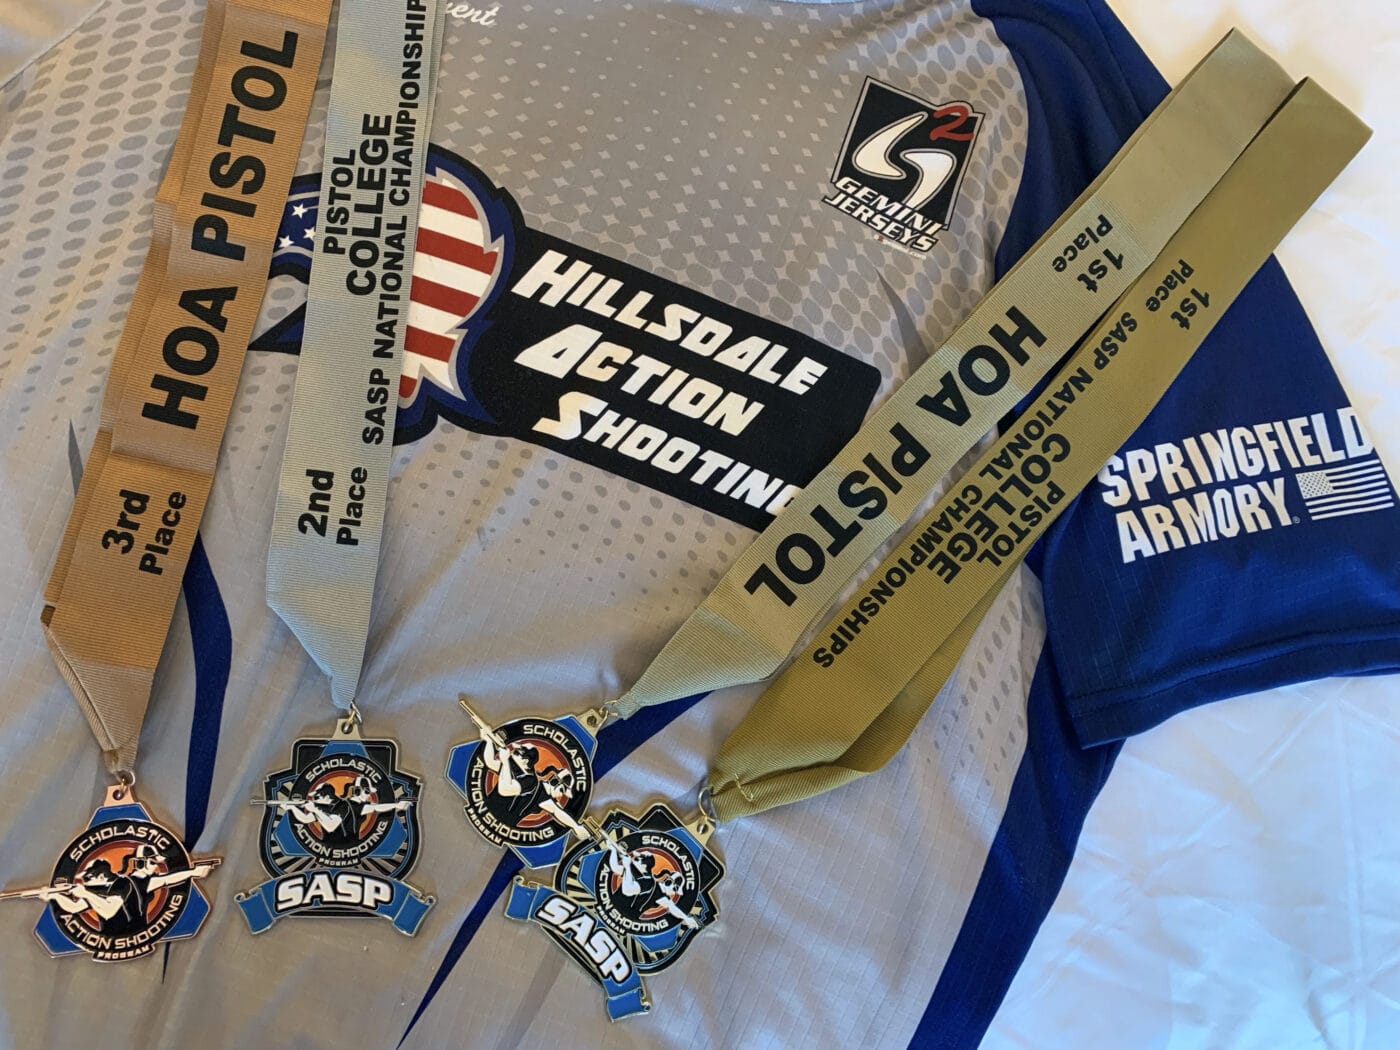 Medals won by Hillsdale College shooting team